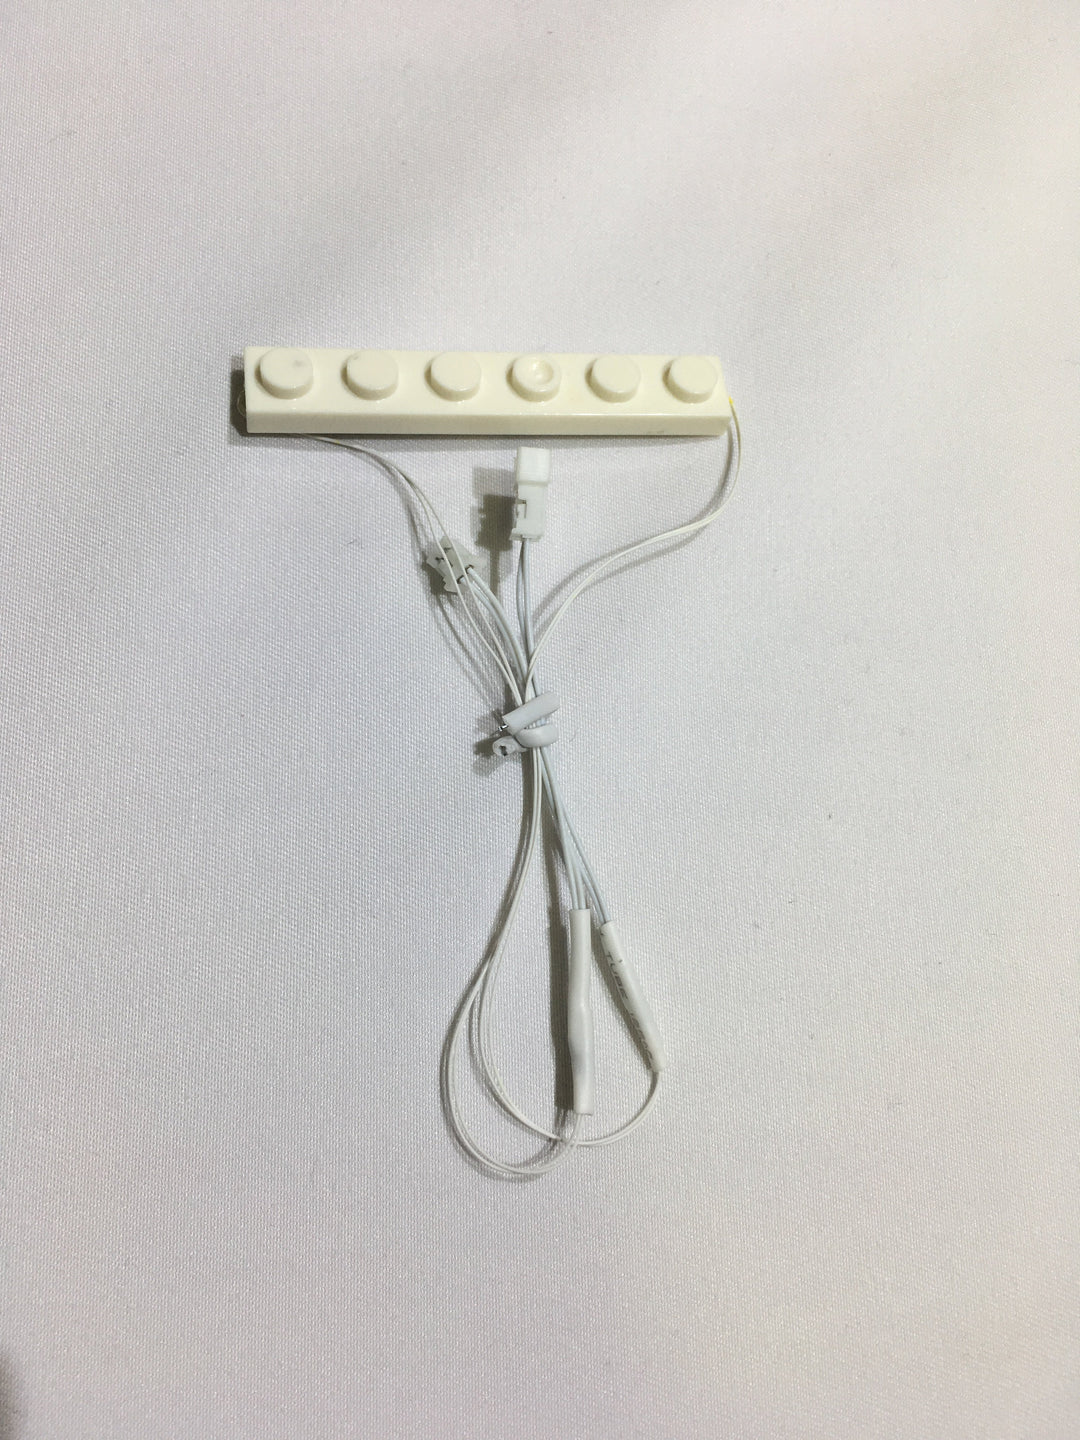 1x6-White-Solid-Plate-LED-LIGHT-LINX-Create-Your-Own-LED-String-works-with-LEGO-bricks-by-Brick-Loot